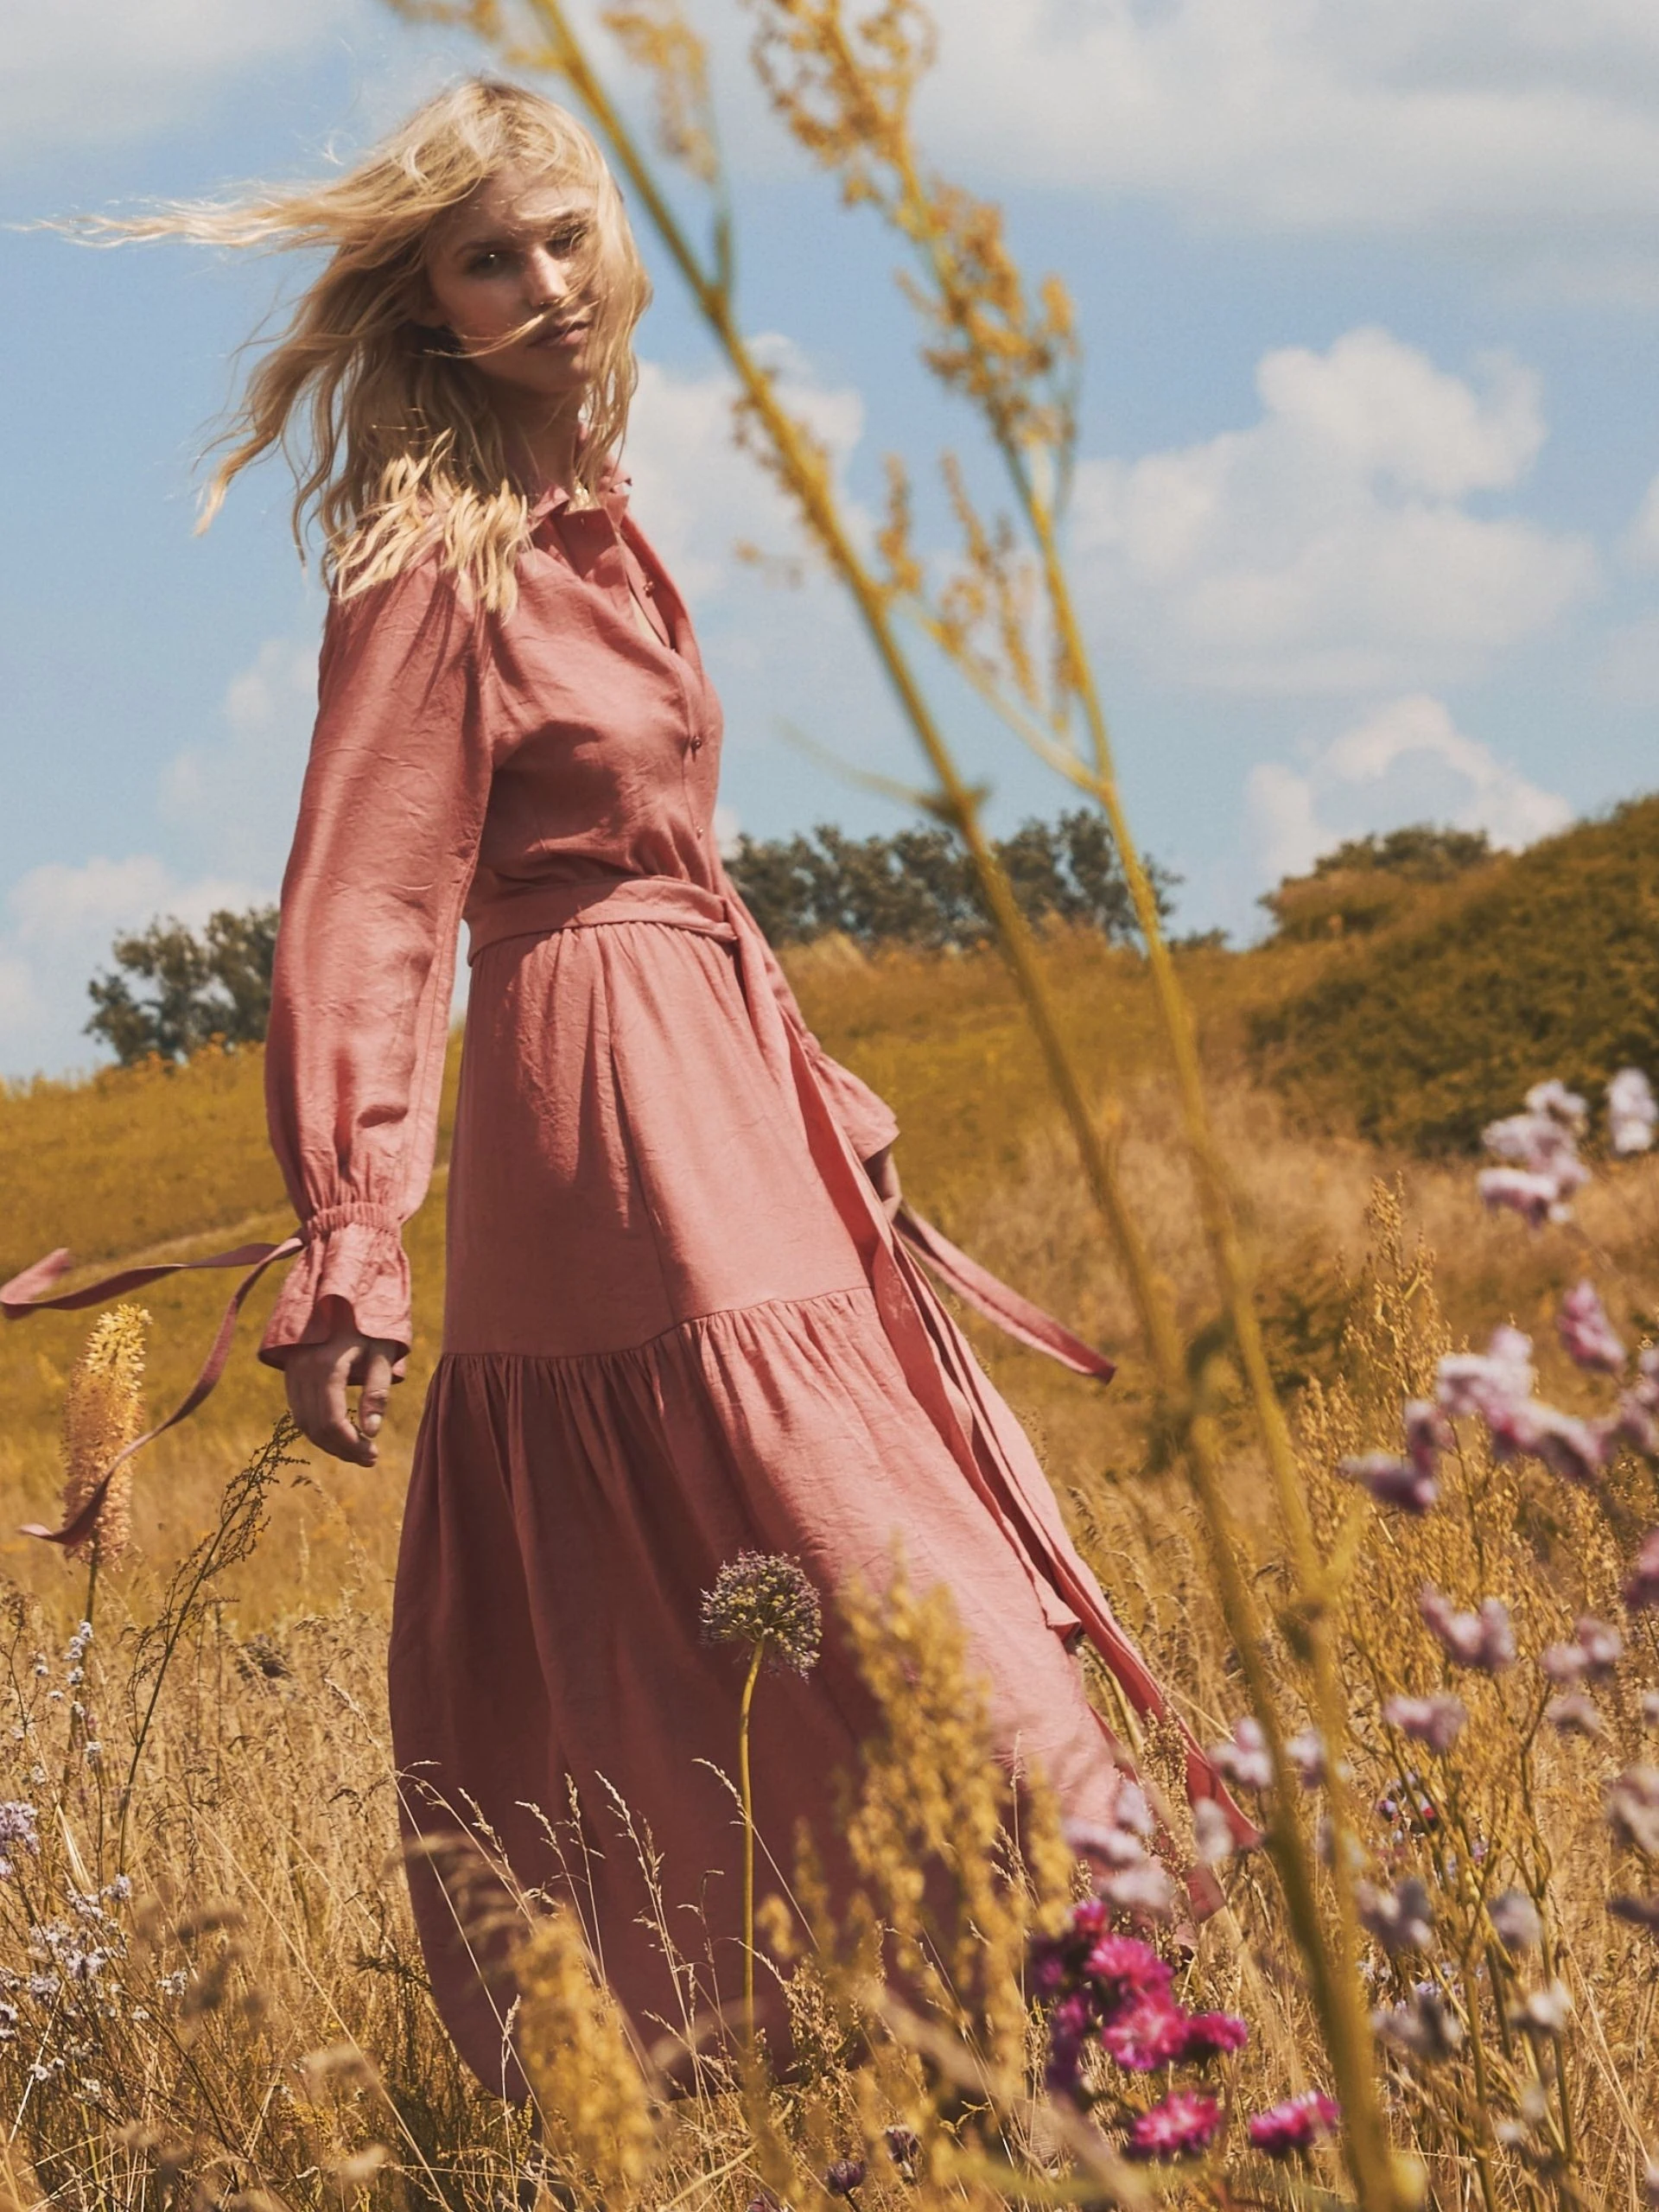 Boho-style dress in dirty pink